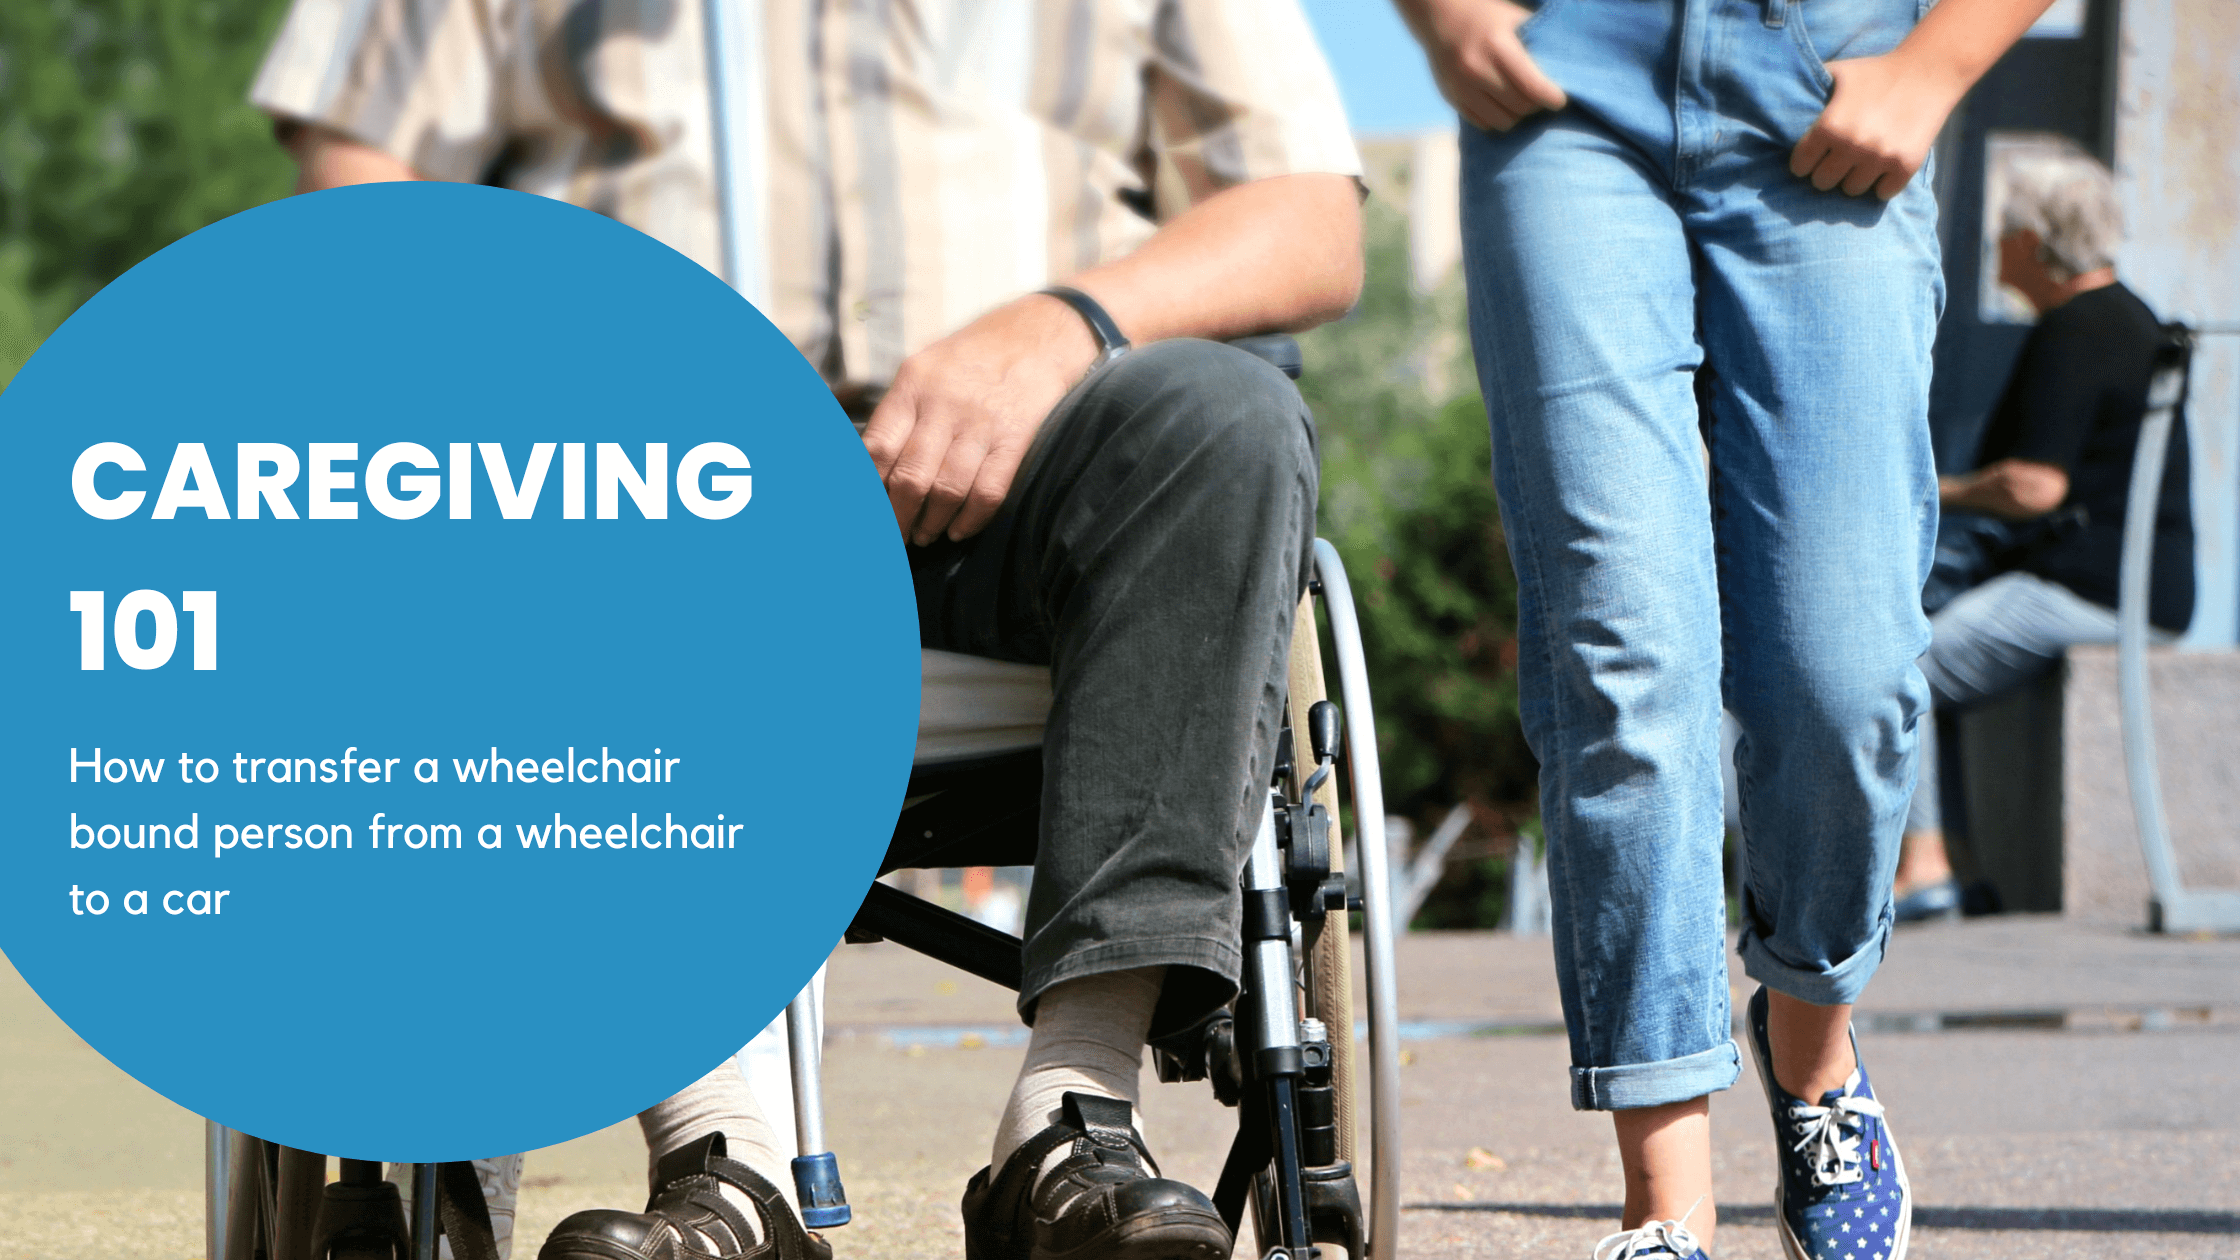 Caregiving 101: How to help a wheelchair bound person into a car